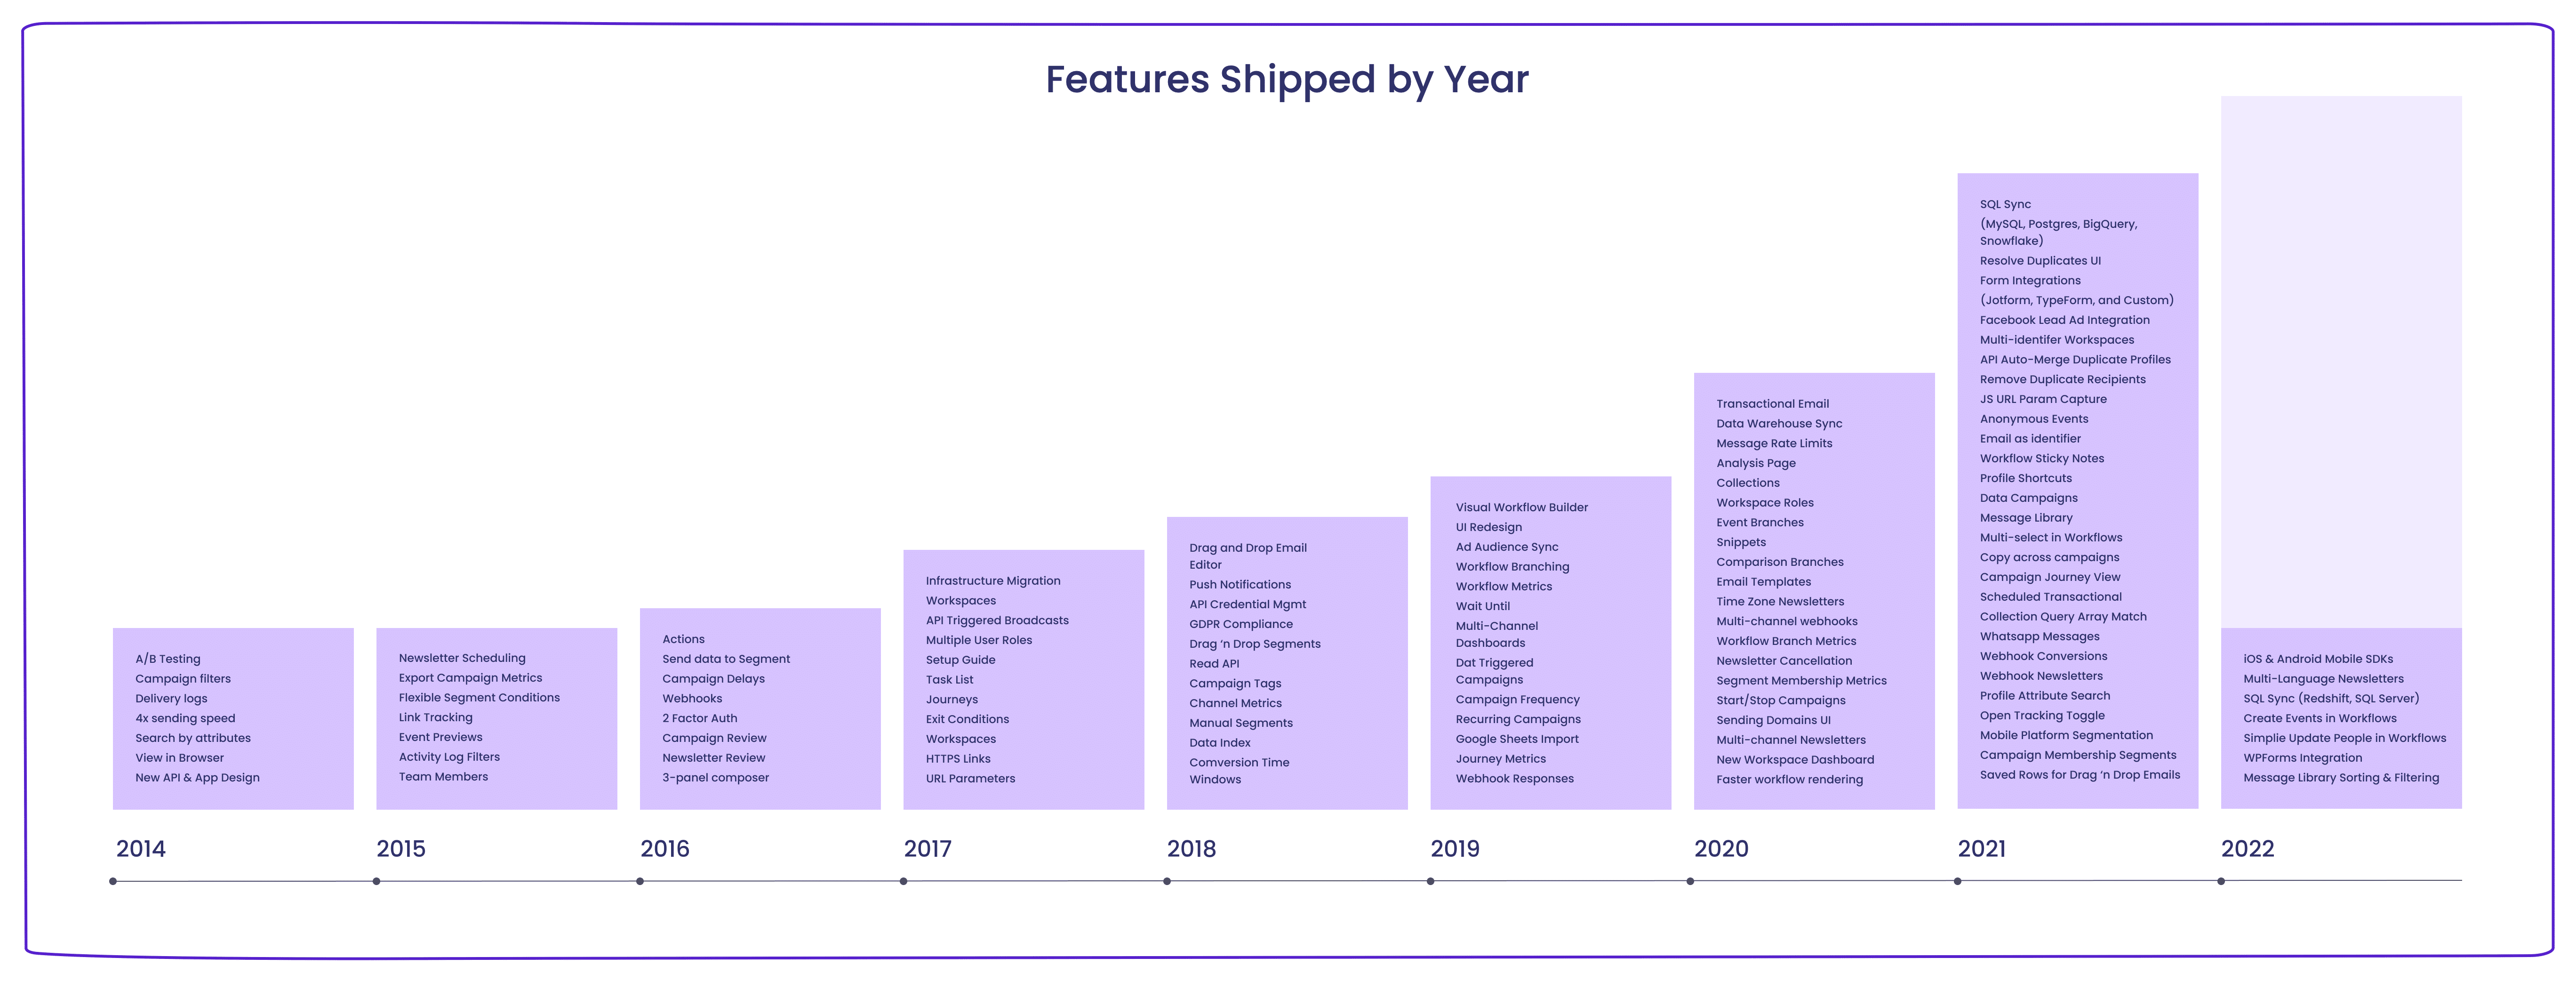 Features shipped over time